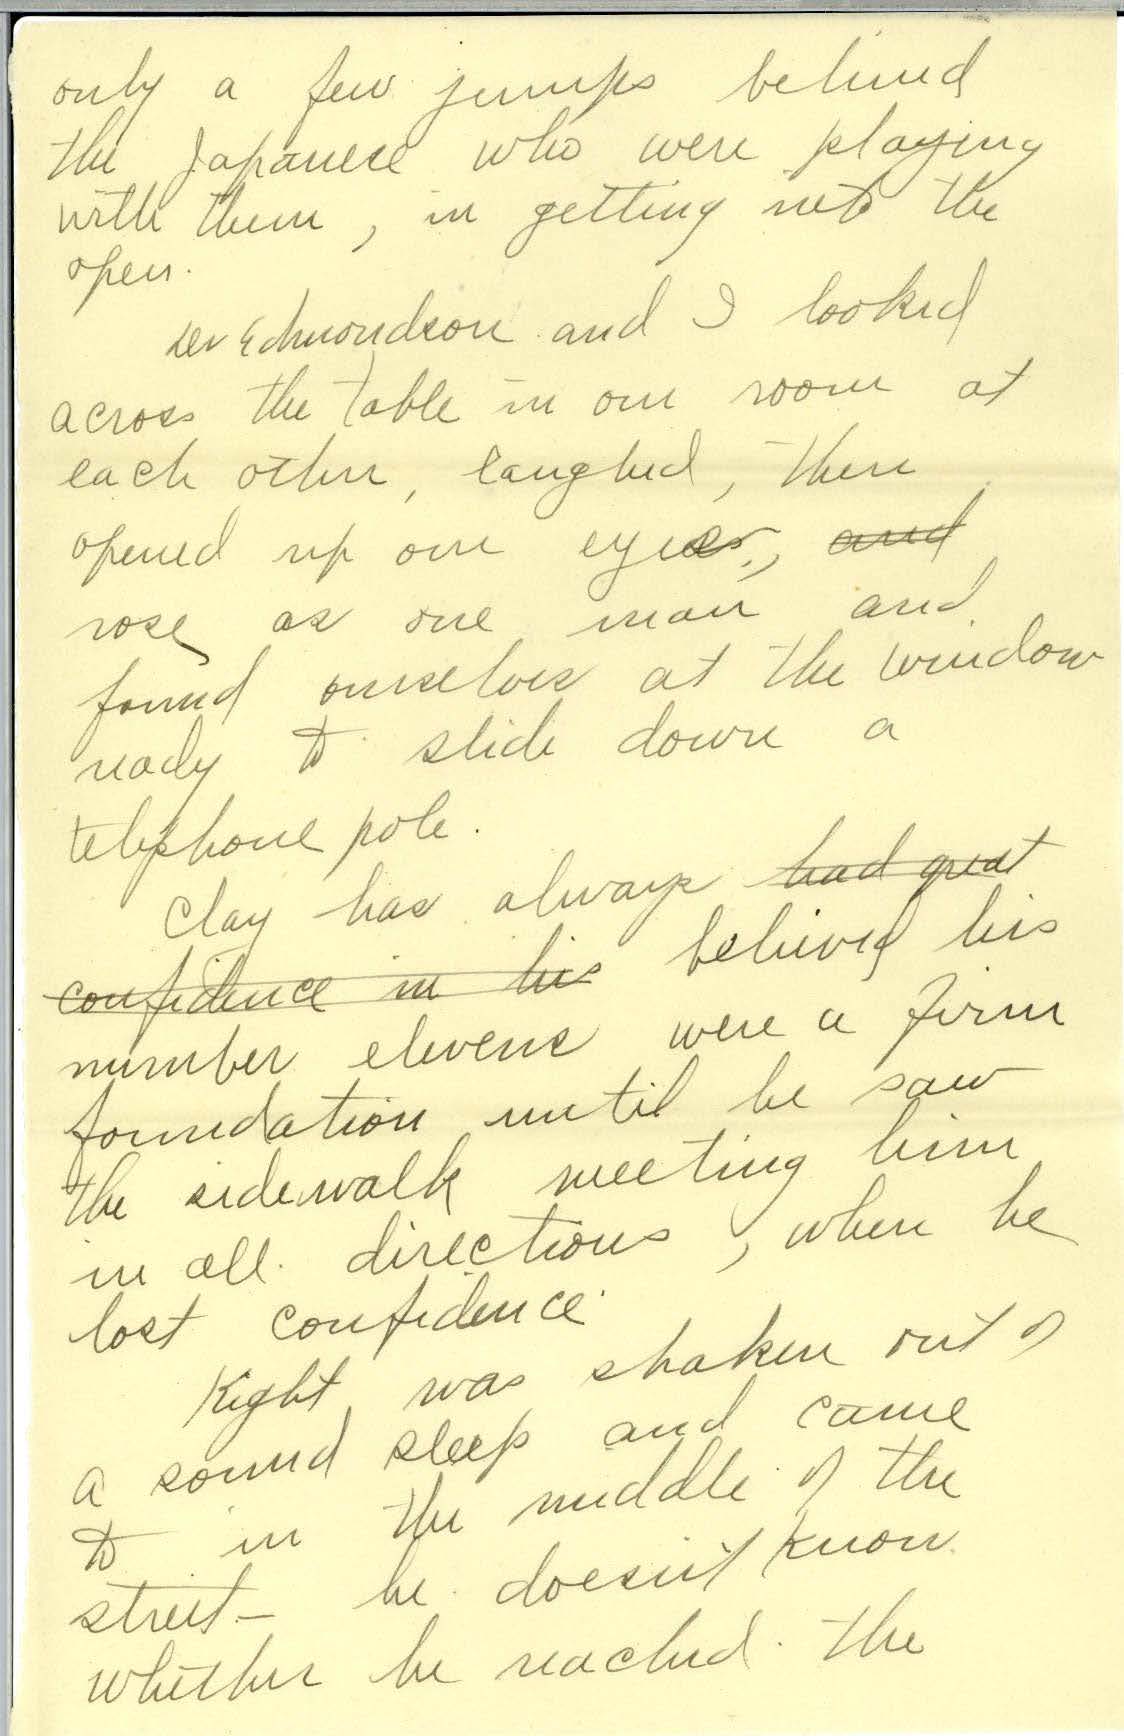 Scan of page 3 of Edna Hatfield's April 30, 1922 letter to Frank R. Elliot - written in cursive handwriting. 